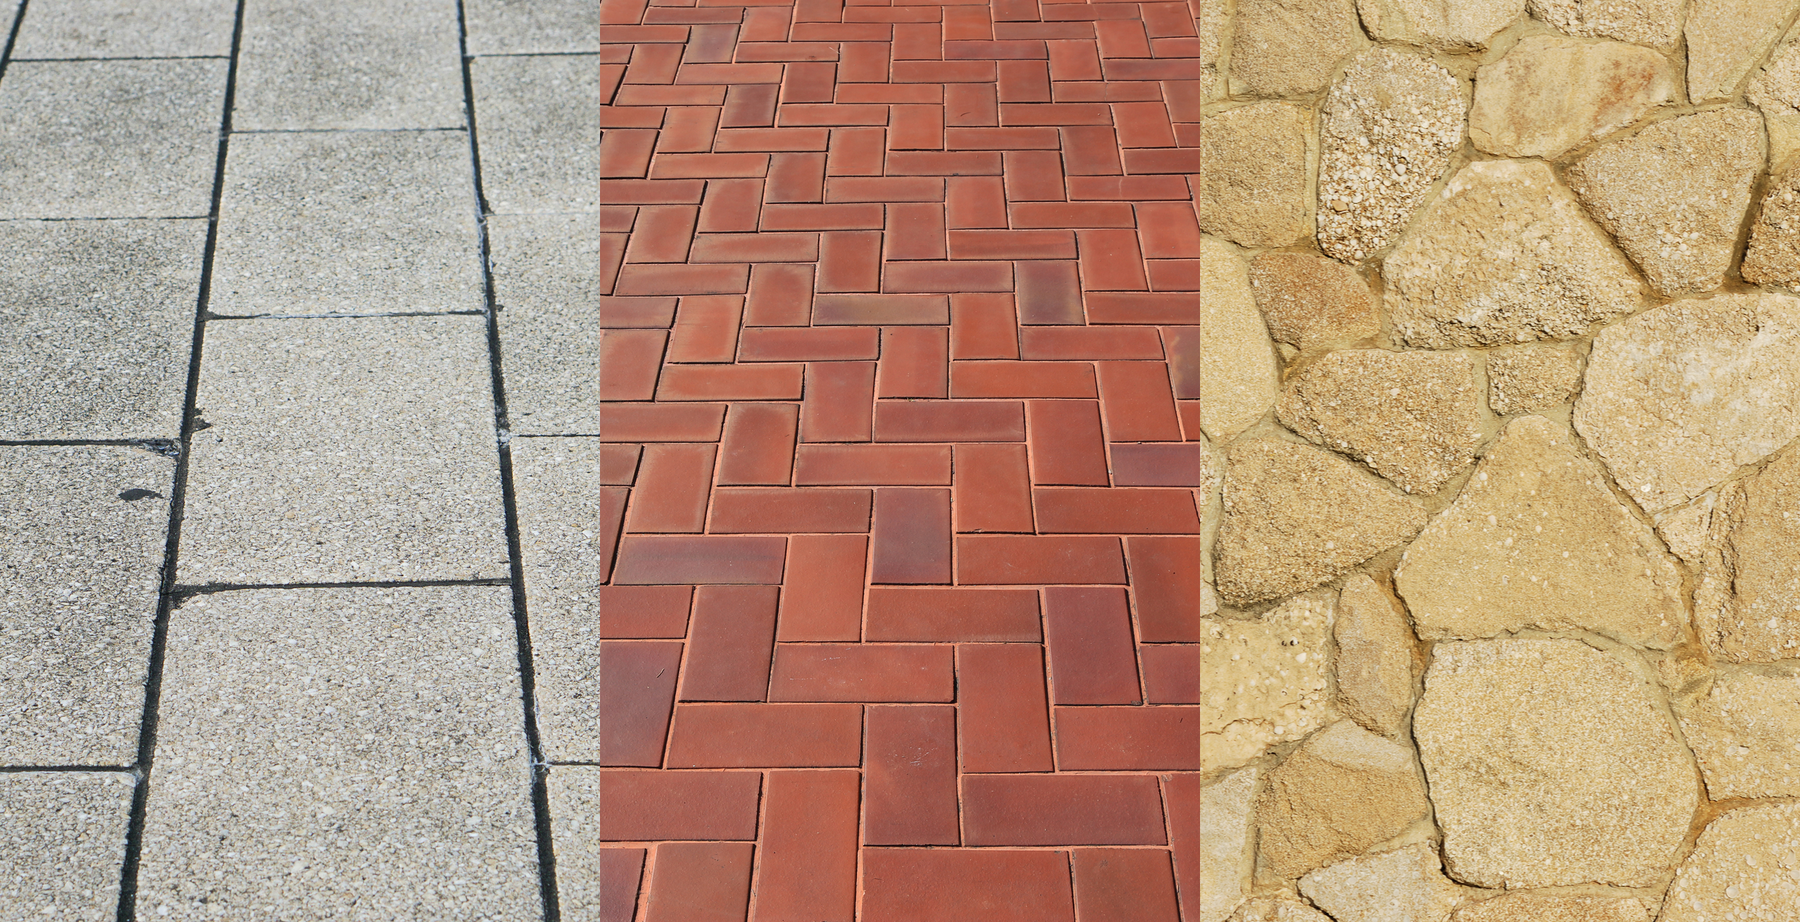 How to clean your bricks, pavers, sandstone and more